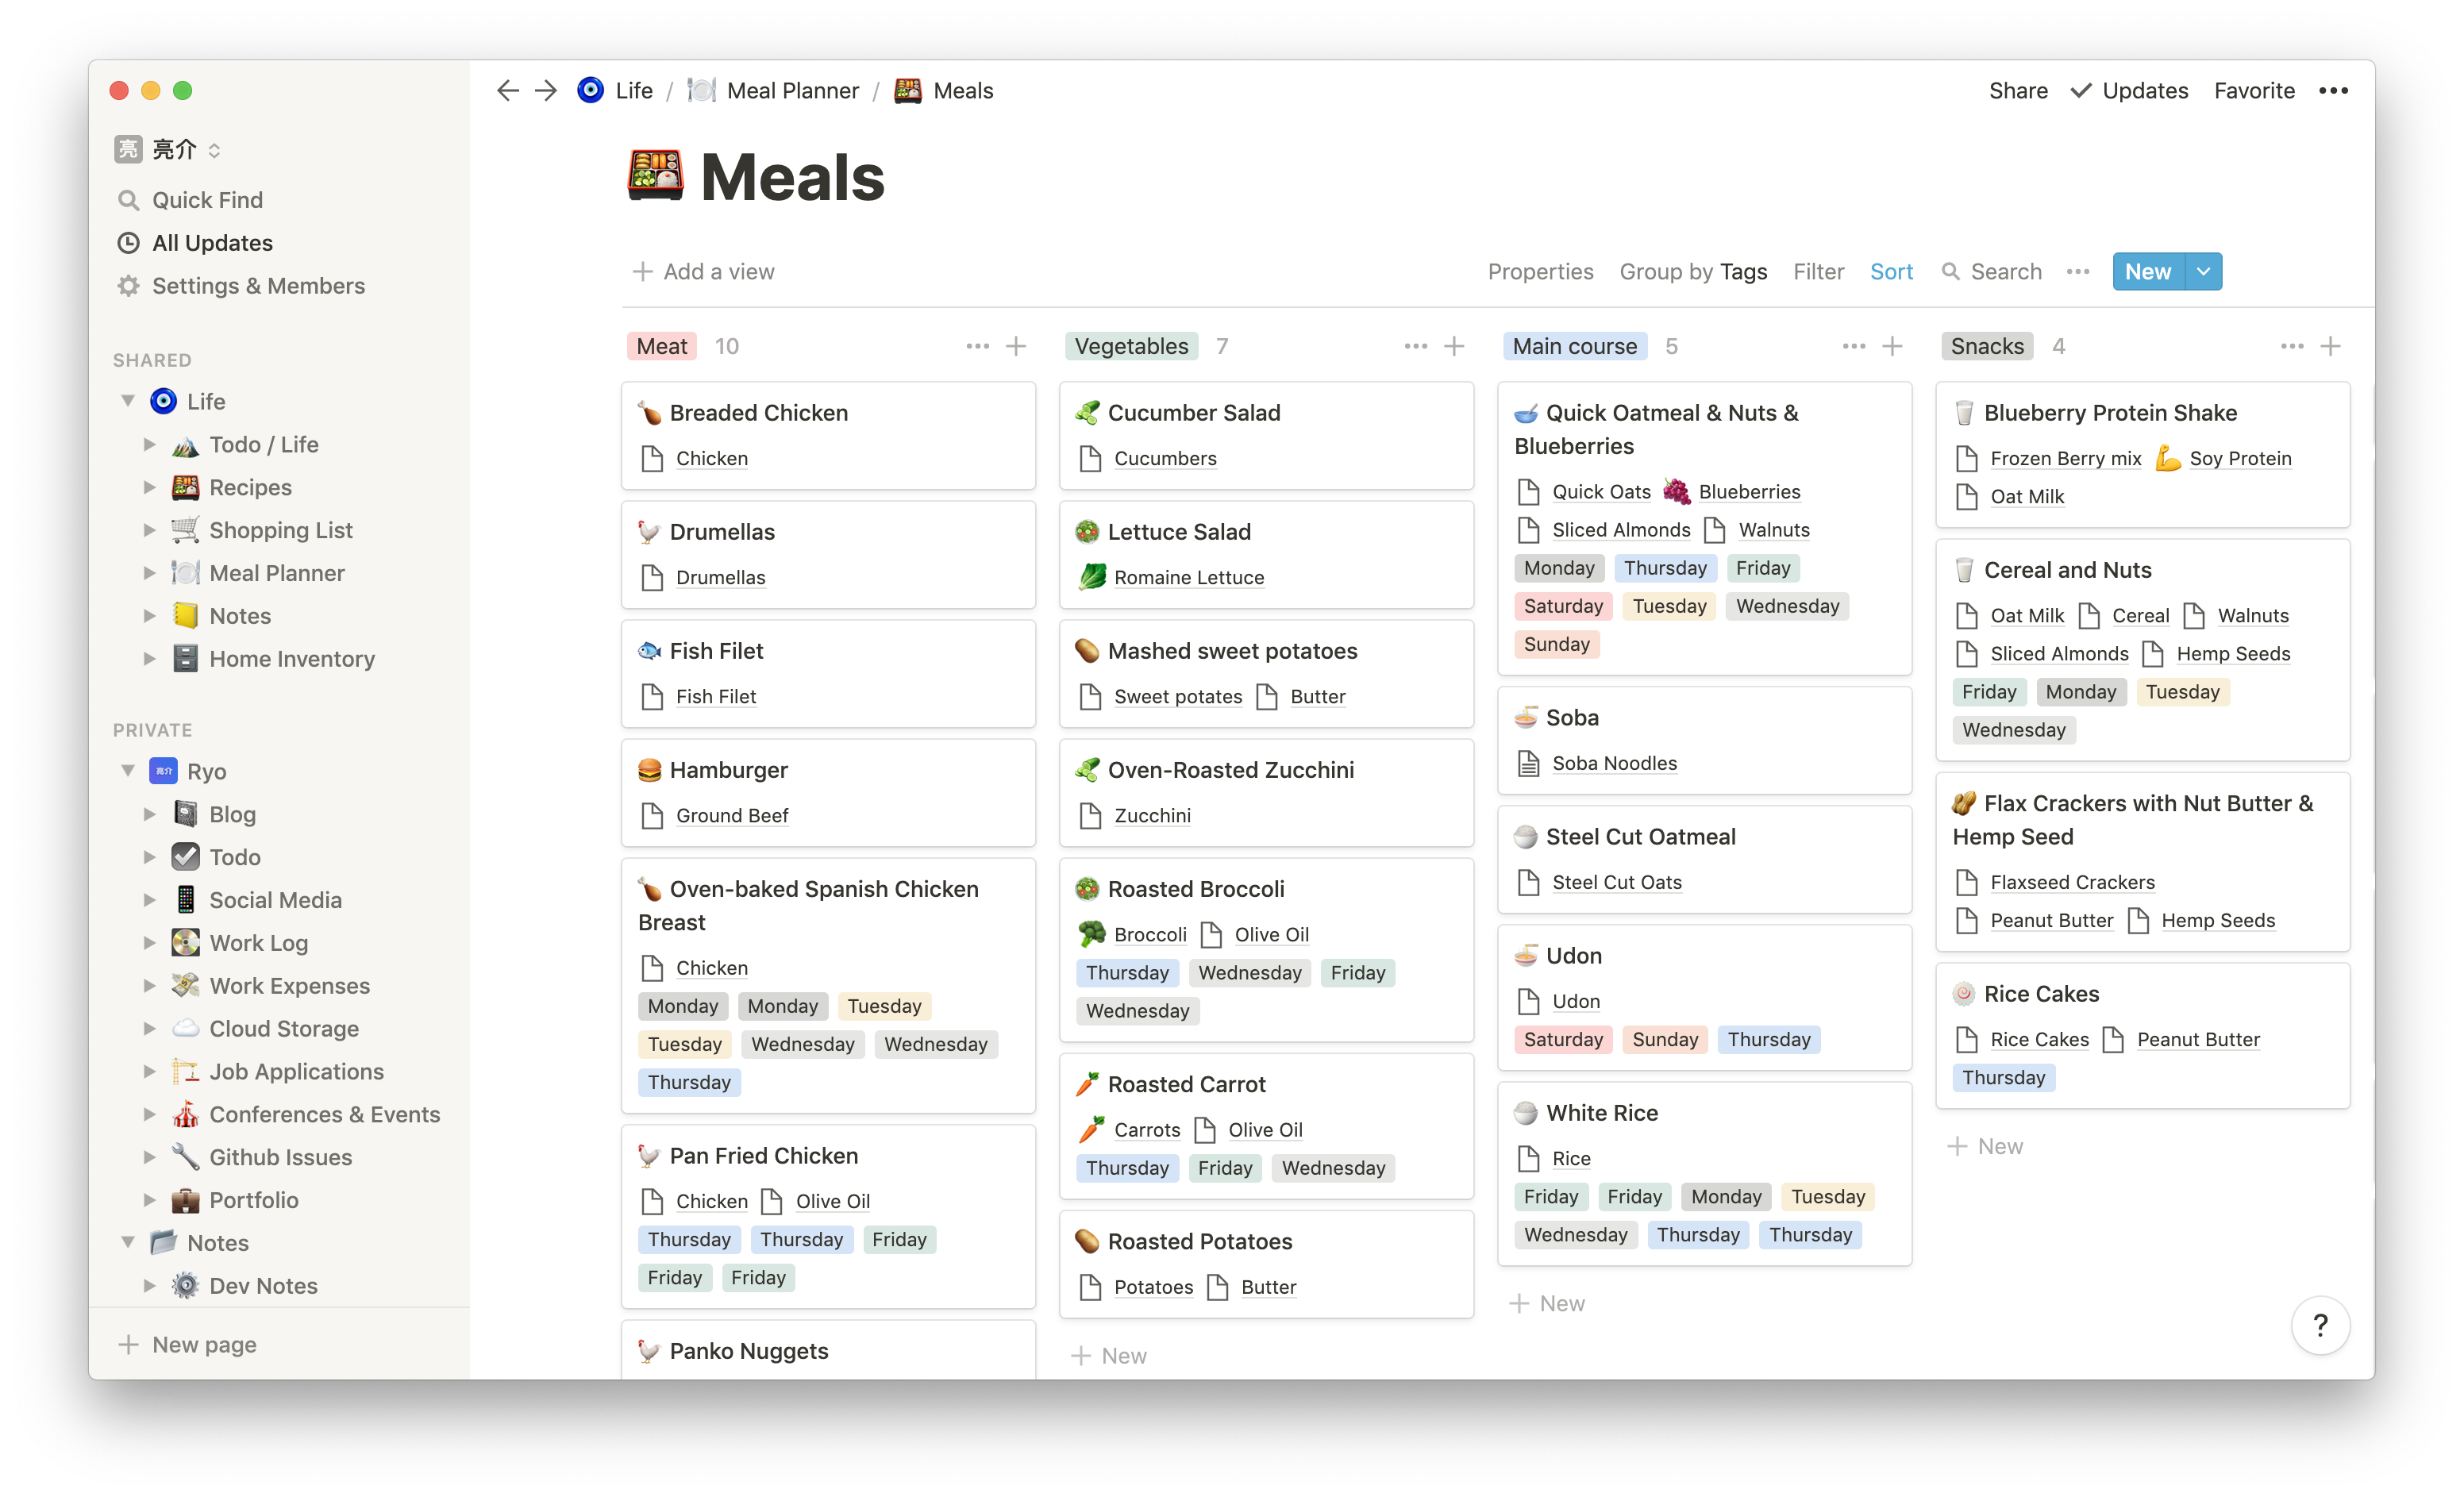 Screenshot of the Notion app on the Meals page with a Kanban view sorted by meal type